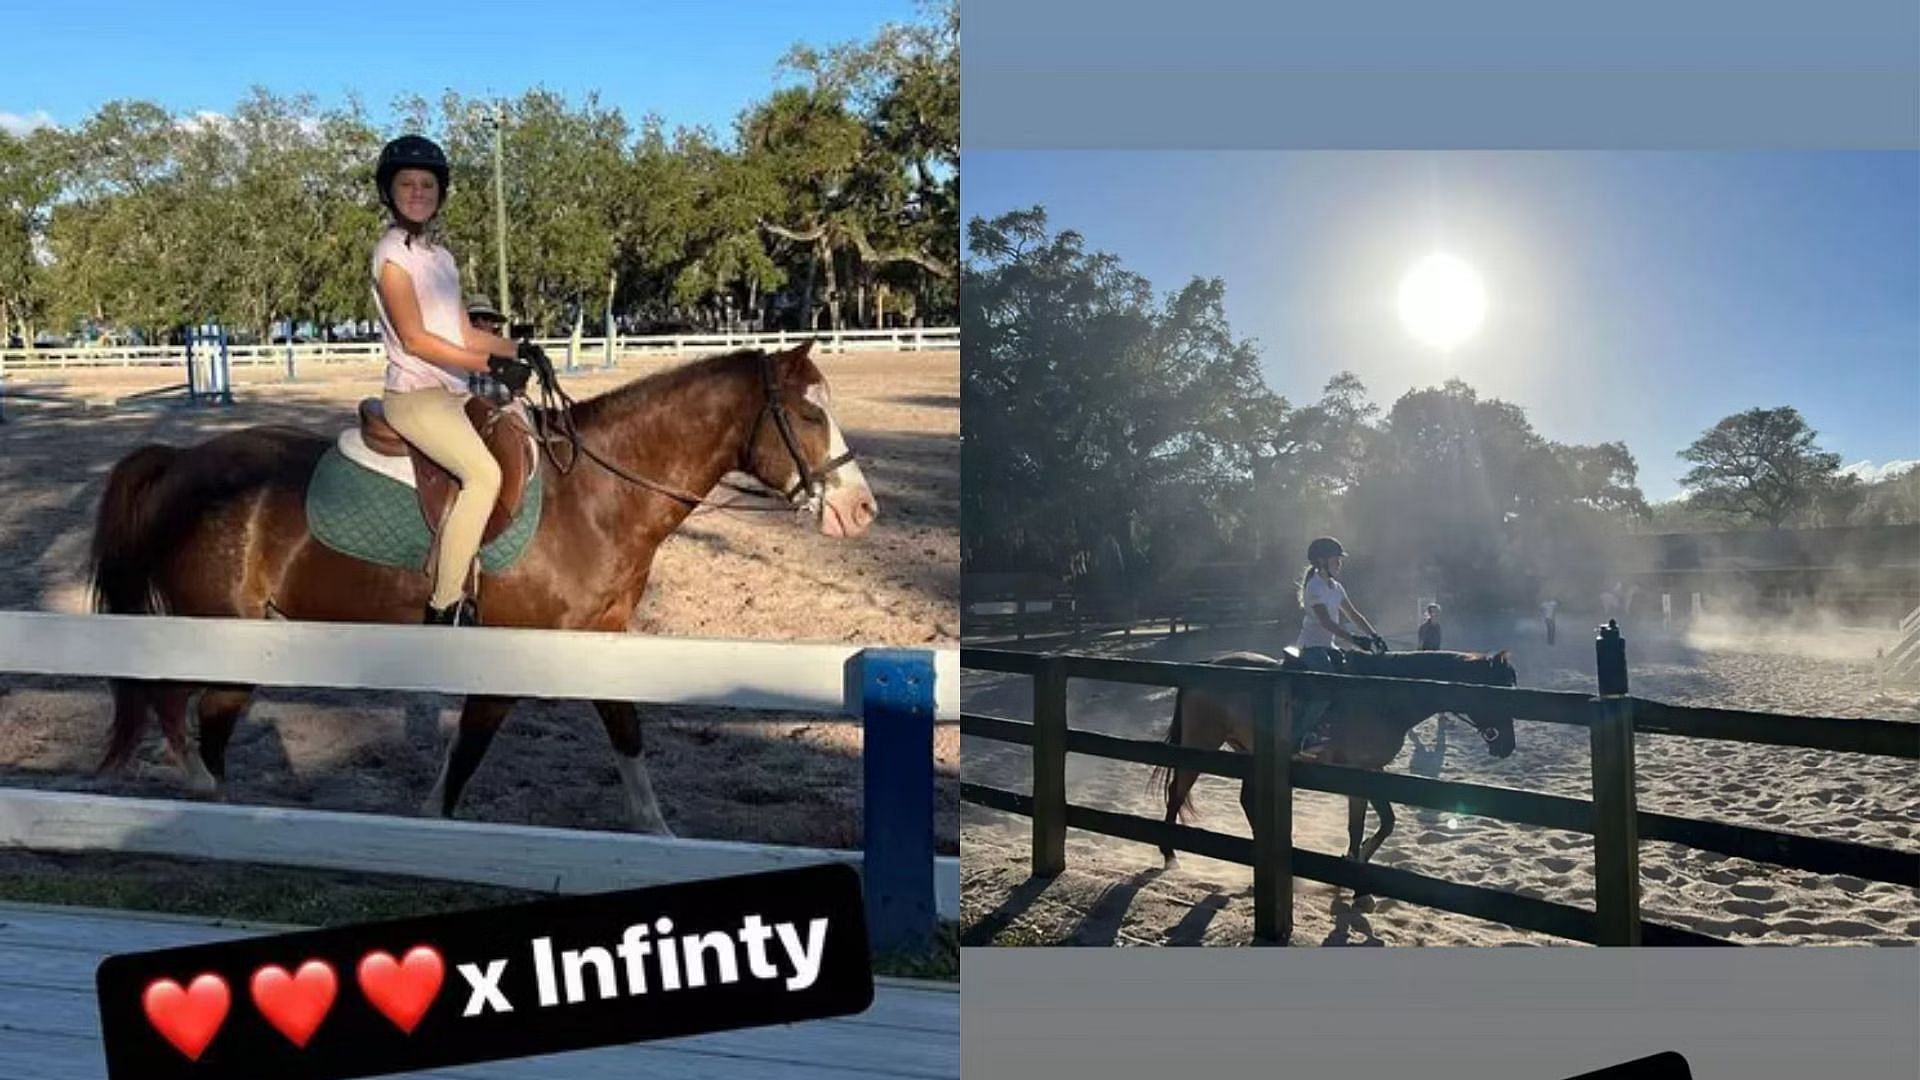 Tom Brady earlier shared pictures of his daughter Vivian on horseback